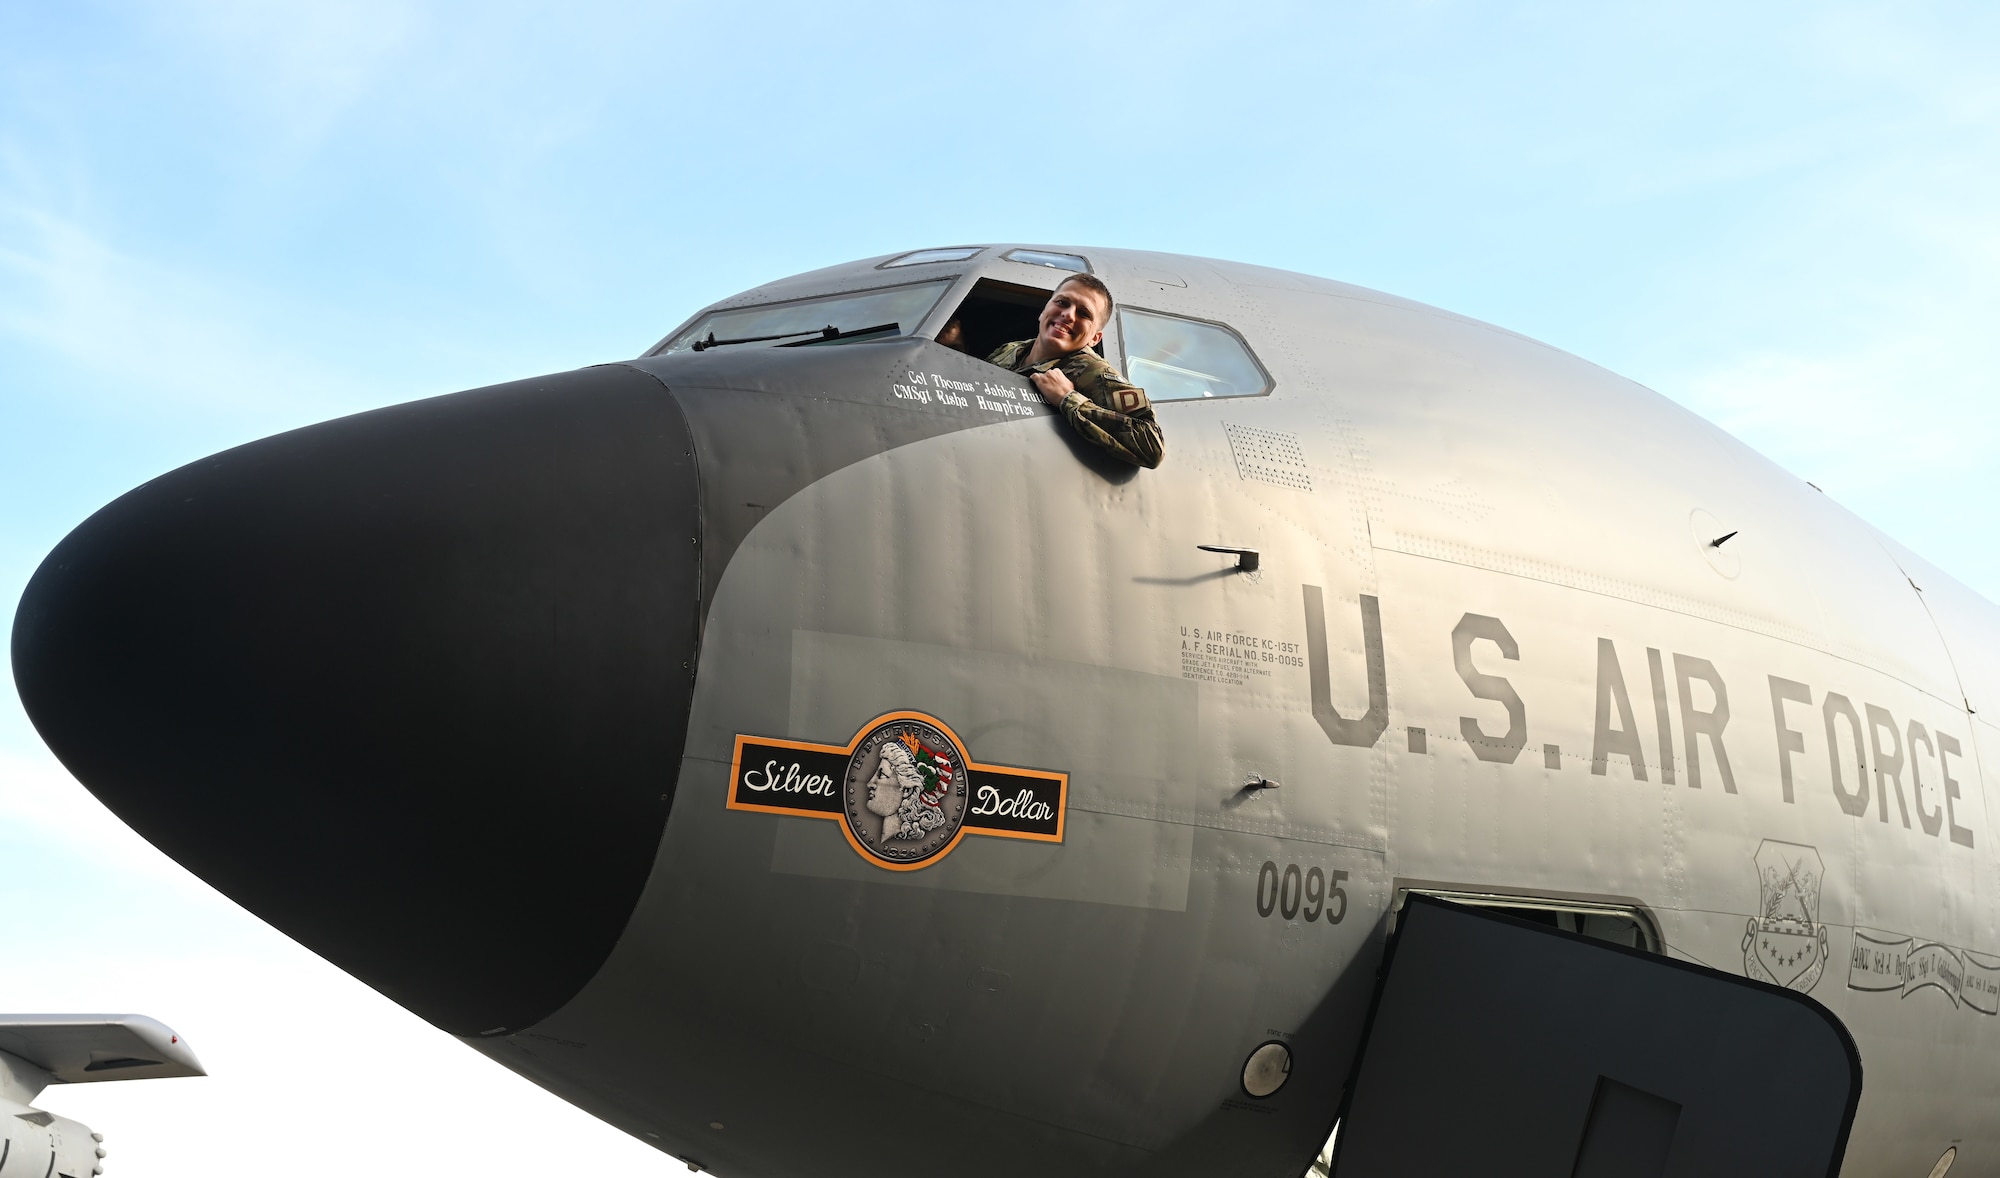 U.S. Air Force Staff Sgt. Tyler Goldsborough, formerly 100th Aircraft Maintenance Squadron, now stationed at Tinker Air Force Base, Okla., sits in the pilot’s seat of a KC-135 Stratotanker after revealing the latest nose art in the 100th Air Refueling Wing’s heritage fleet of tankers during a dedication ceremony at Royal Air Force Mildenhall, England, Oct. 10, 2023. Goldsborough designed the updated nose art – the first to sport double-sided nose art, based on a Silver Dollar coin, and attended the ceremony to assist with the unveiling of his design. (U.S. Air Force photo by Karen Abeyasekere)